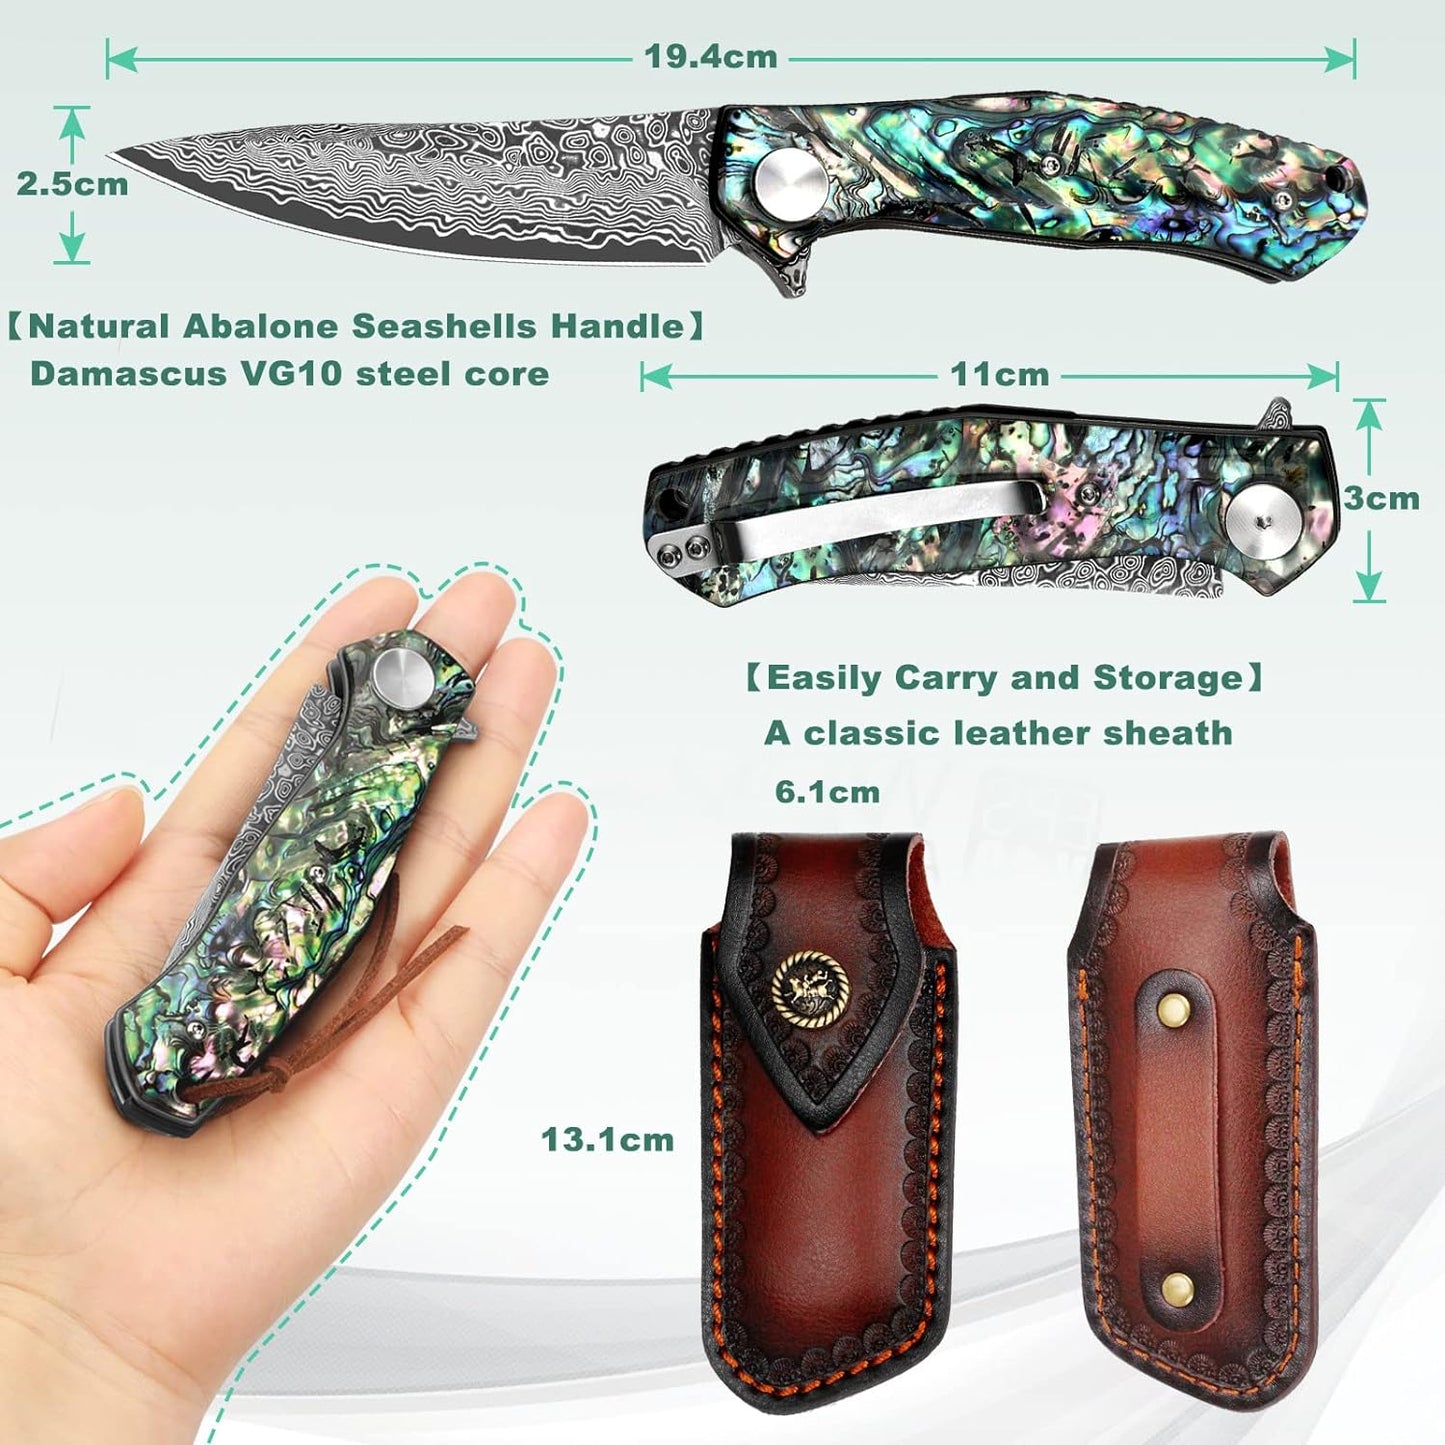 KD Pocket Knife Damascus Steel VG10 Handle with Clip Leather Sheath